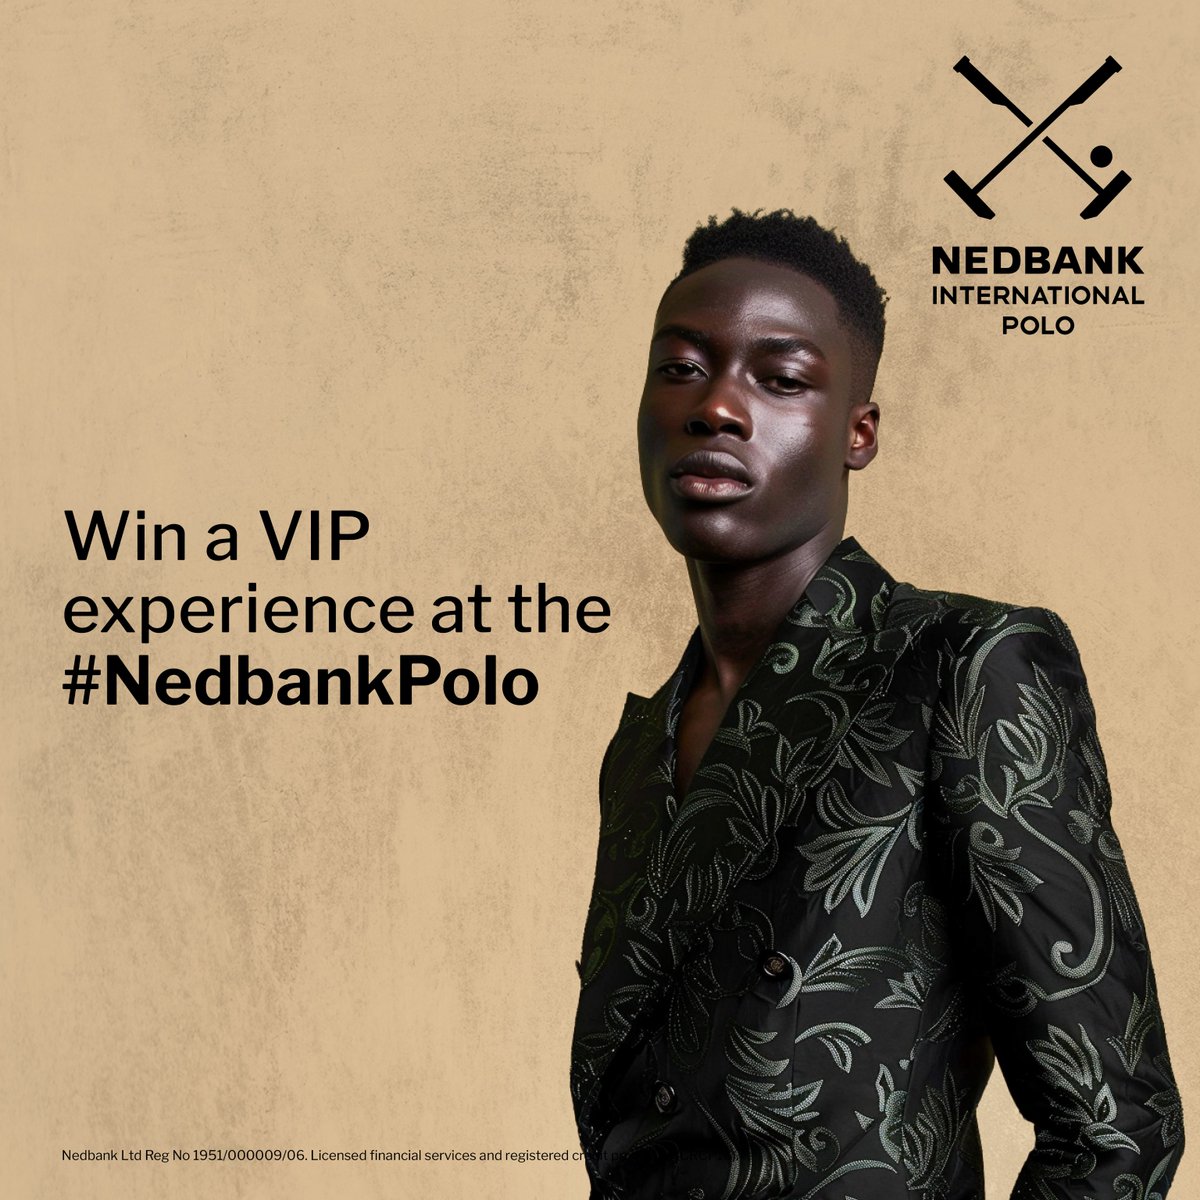 Have you opened your MiGoals Premium Account yet? If you open one in April, you could win a VIP experience for the @NedbankIntlPolo. Don’t miss out! ✨ Open a MiGoals Premium Account now for your chance to win by clicking here: ow.ly/G3XR50Rp1Qr #NedbankPolo. T&Cs apply